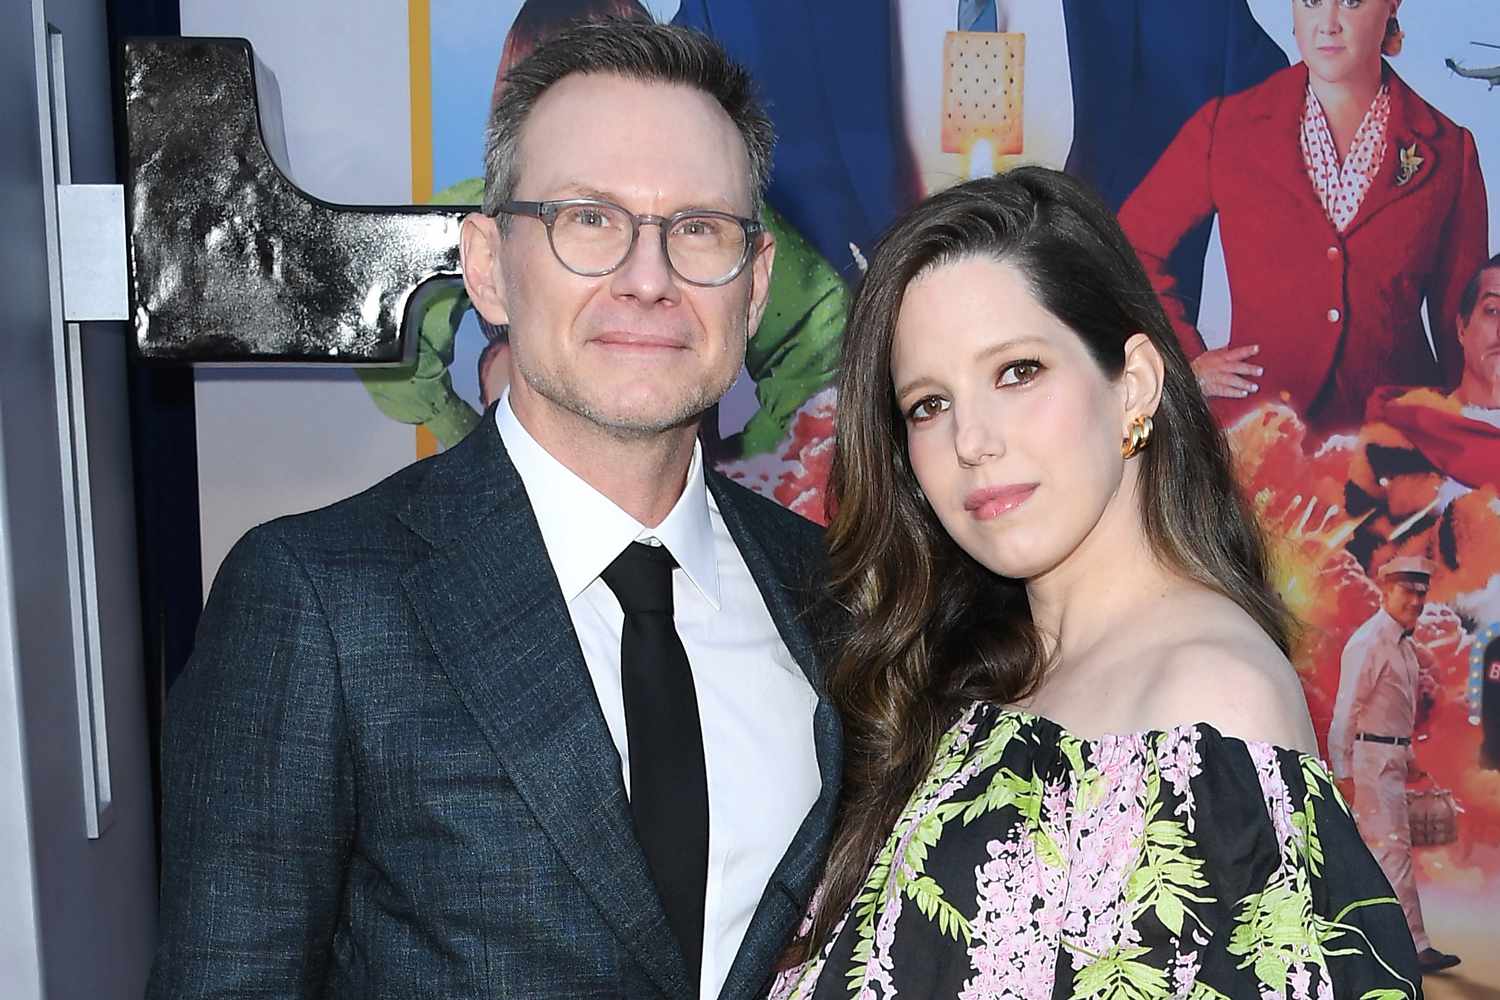 Christian Slater and Wife Brittany Reveal They're Expecting Second Baby Together as They Walk L.A. Red Carpet